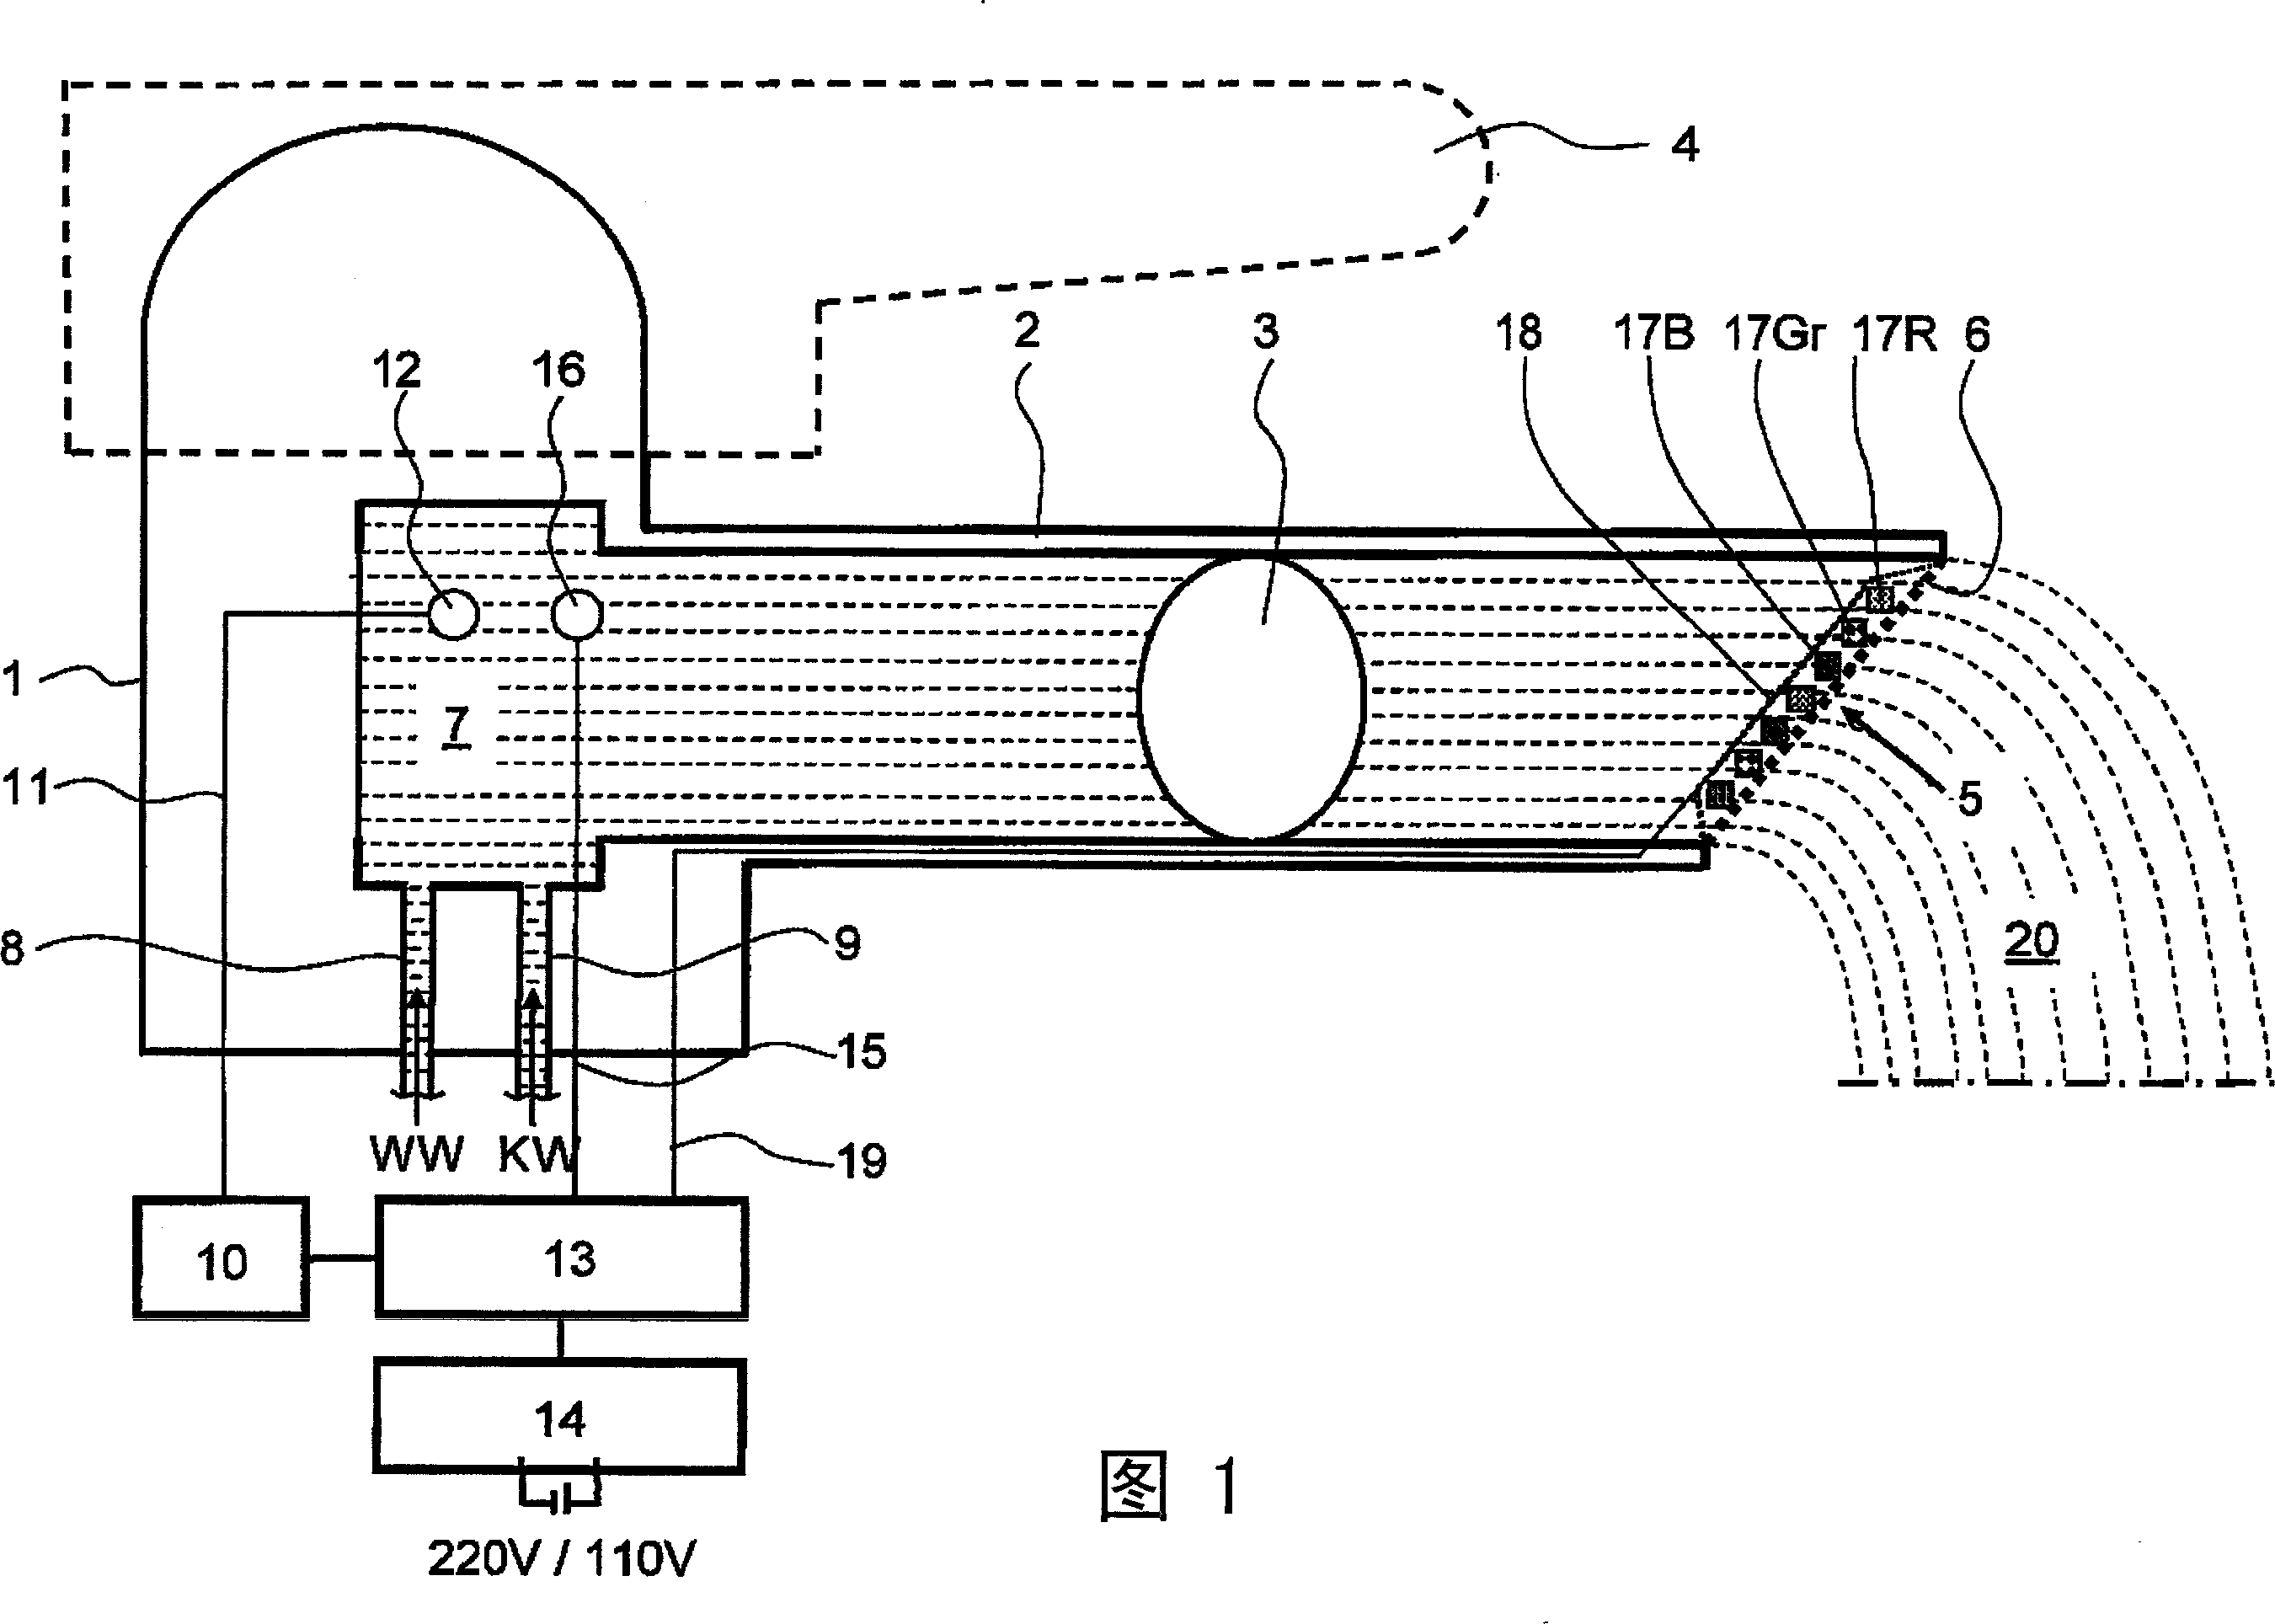 Colored water flow producing method for use in hot water fitting